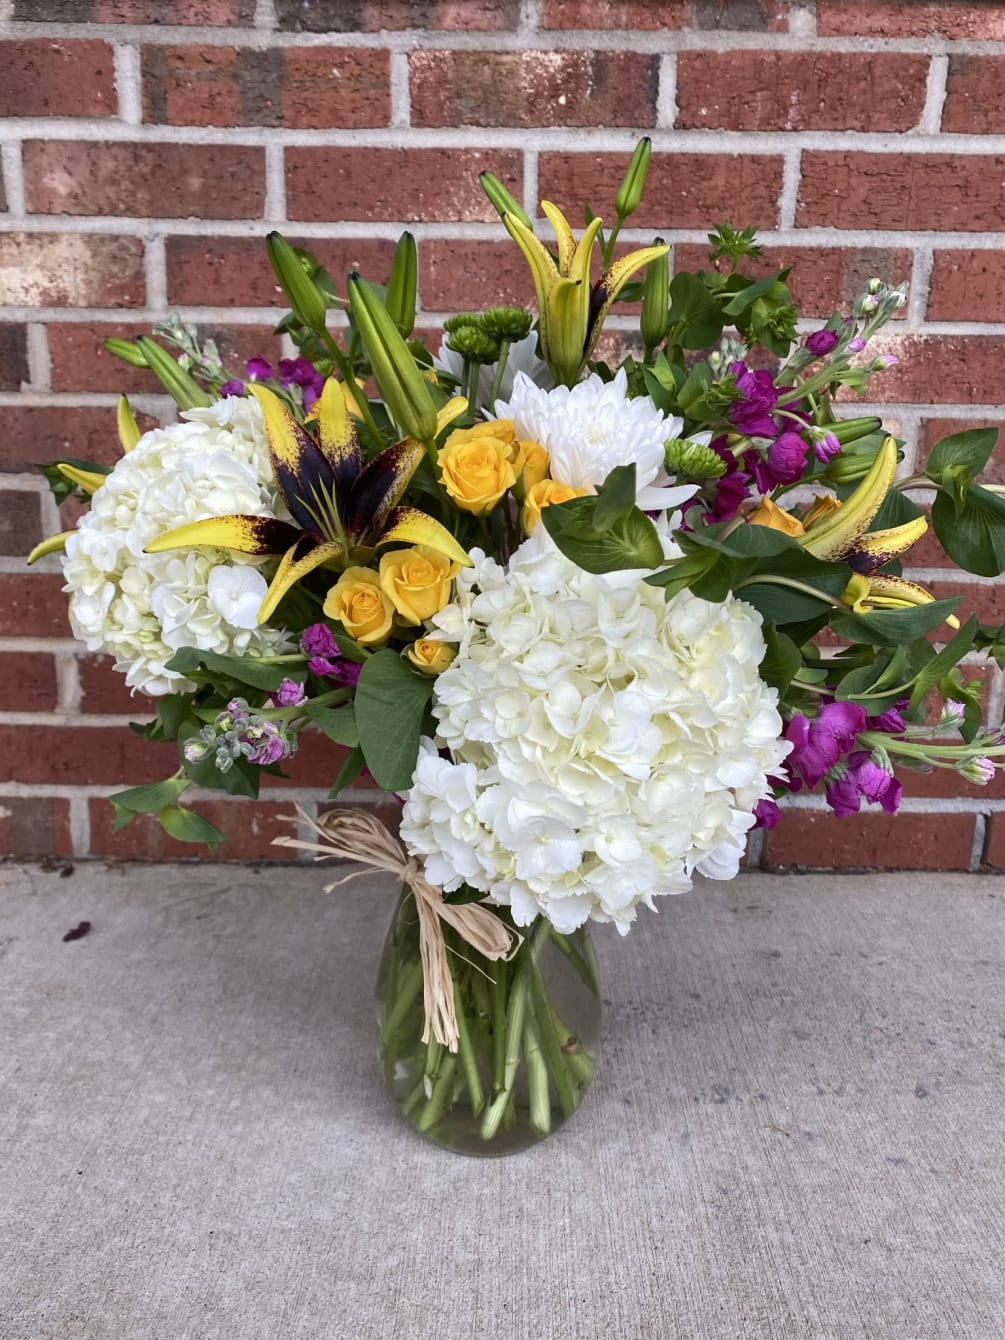 This lovely lily bouquet is a mix of seasonal summer flowers. 
Colors